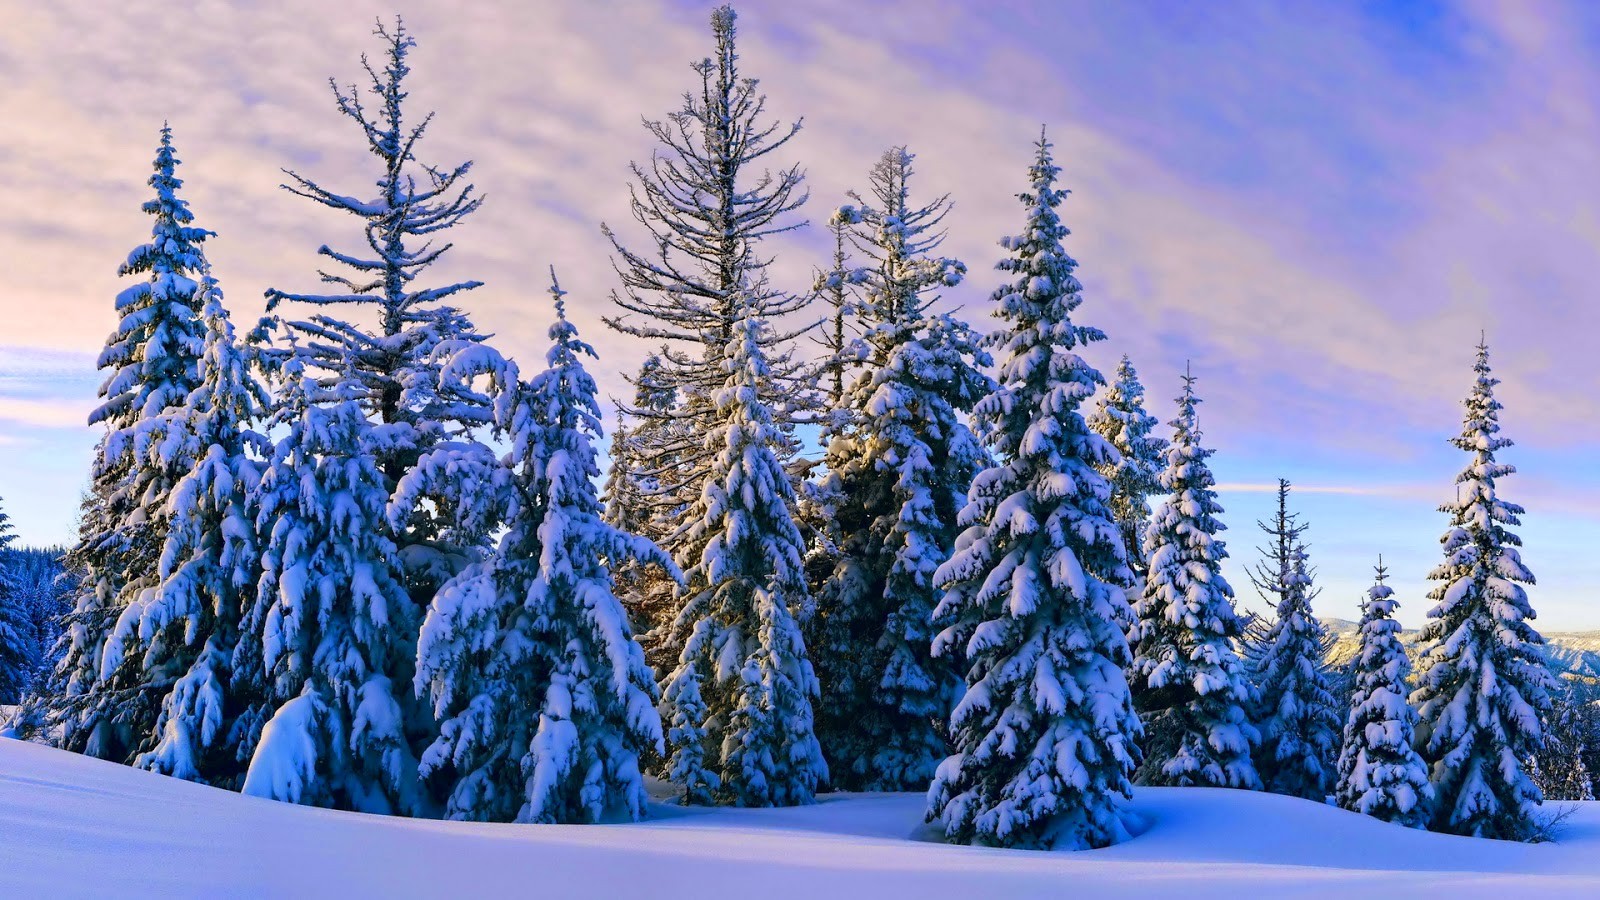 General 1600x900 nature pine trees snow forest cold ice outdoors winter